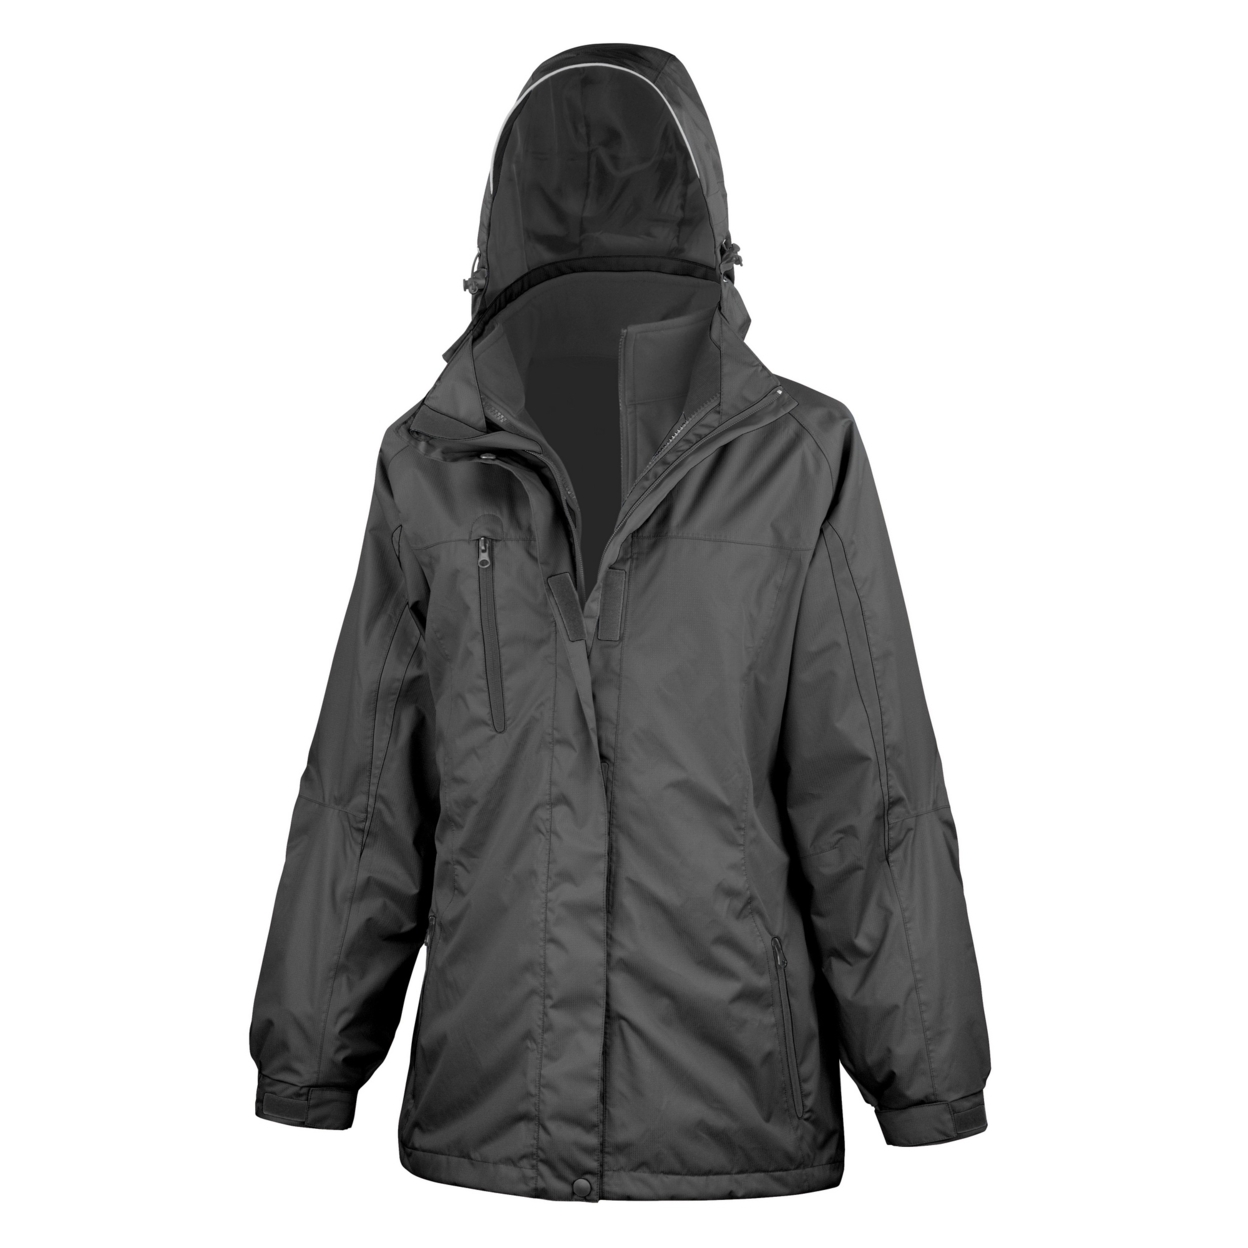 Result Womens 3 In 1 Softshell Journey Jacket With Hood - image 4 of 5